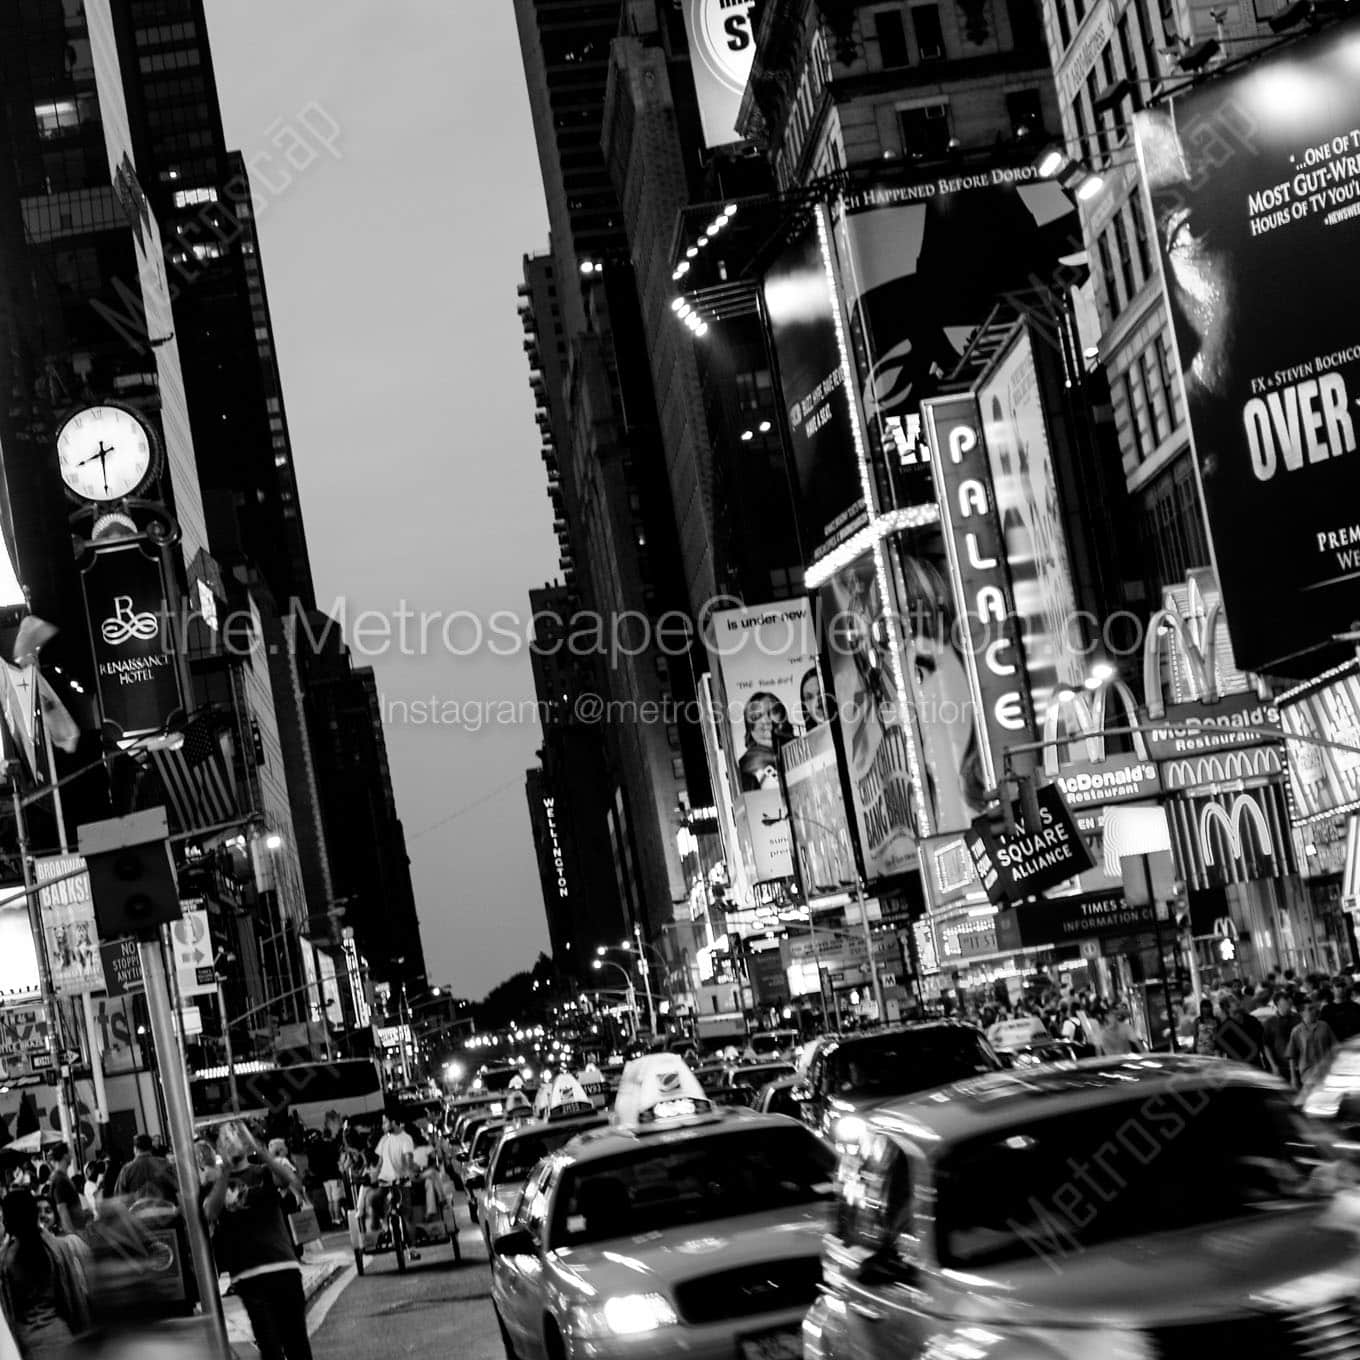 taxi cabs in times square Black & White Wall Art